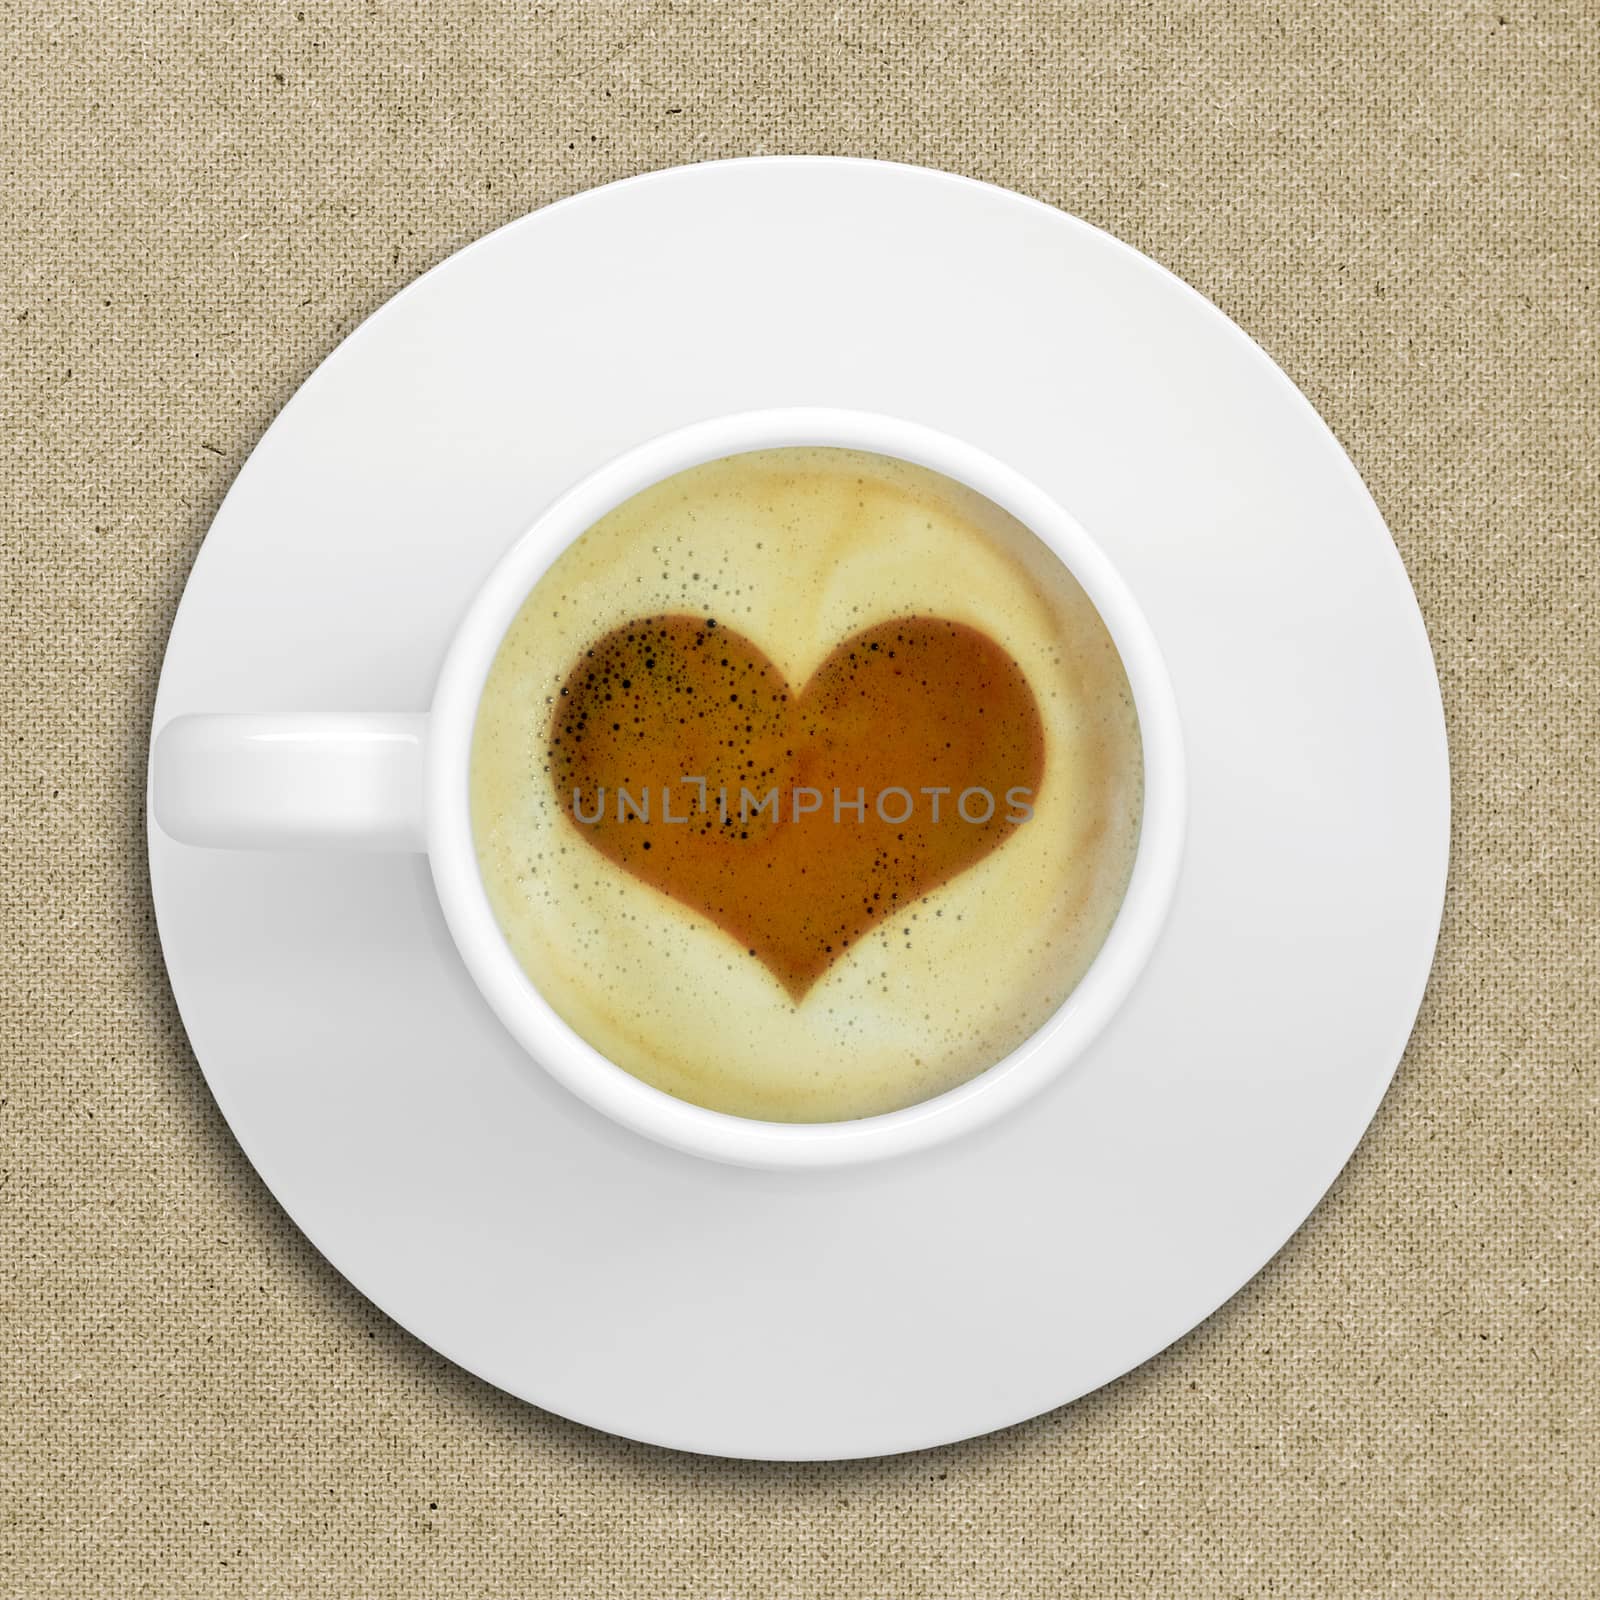 Cup of coffee standing on a wooden surface. Picture of the heart in the coffee crema. top view